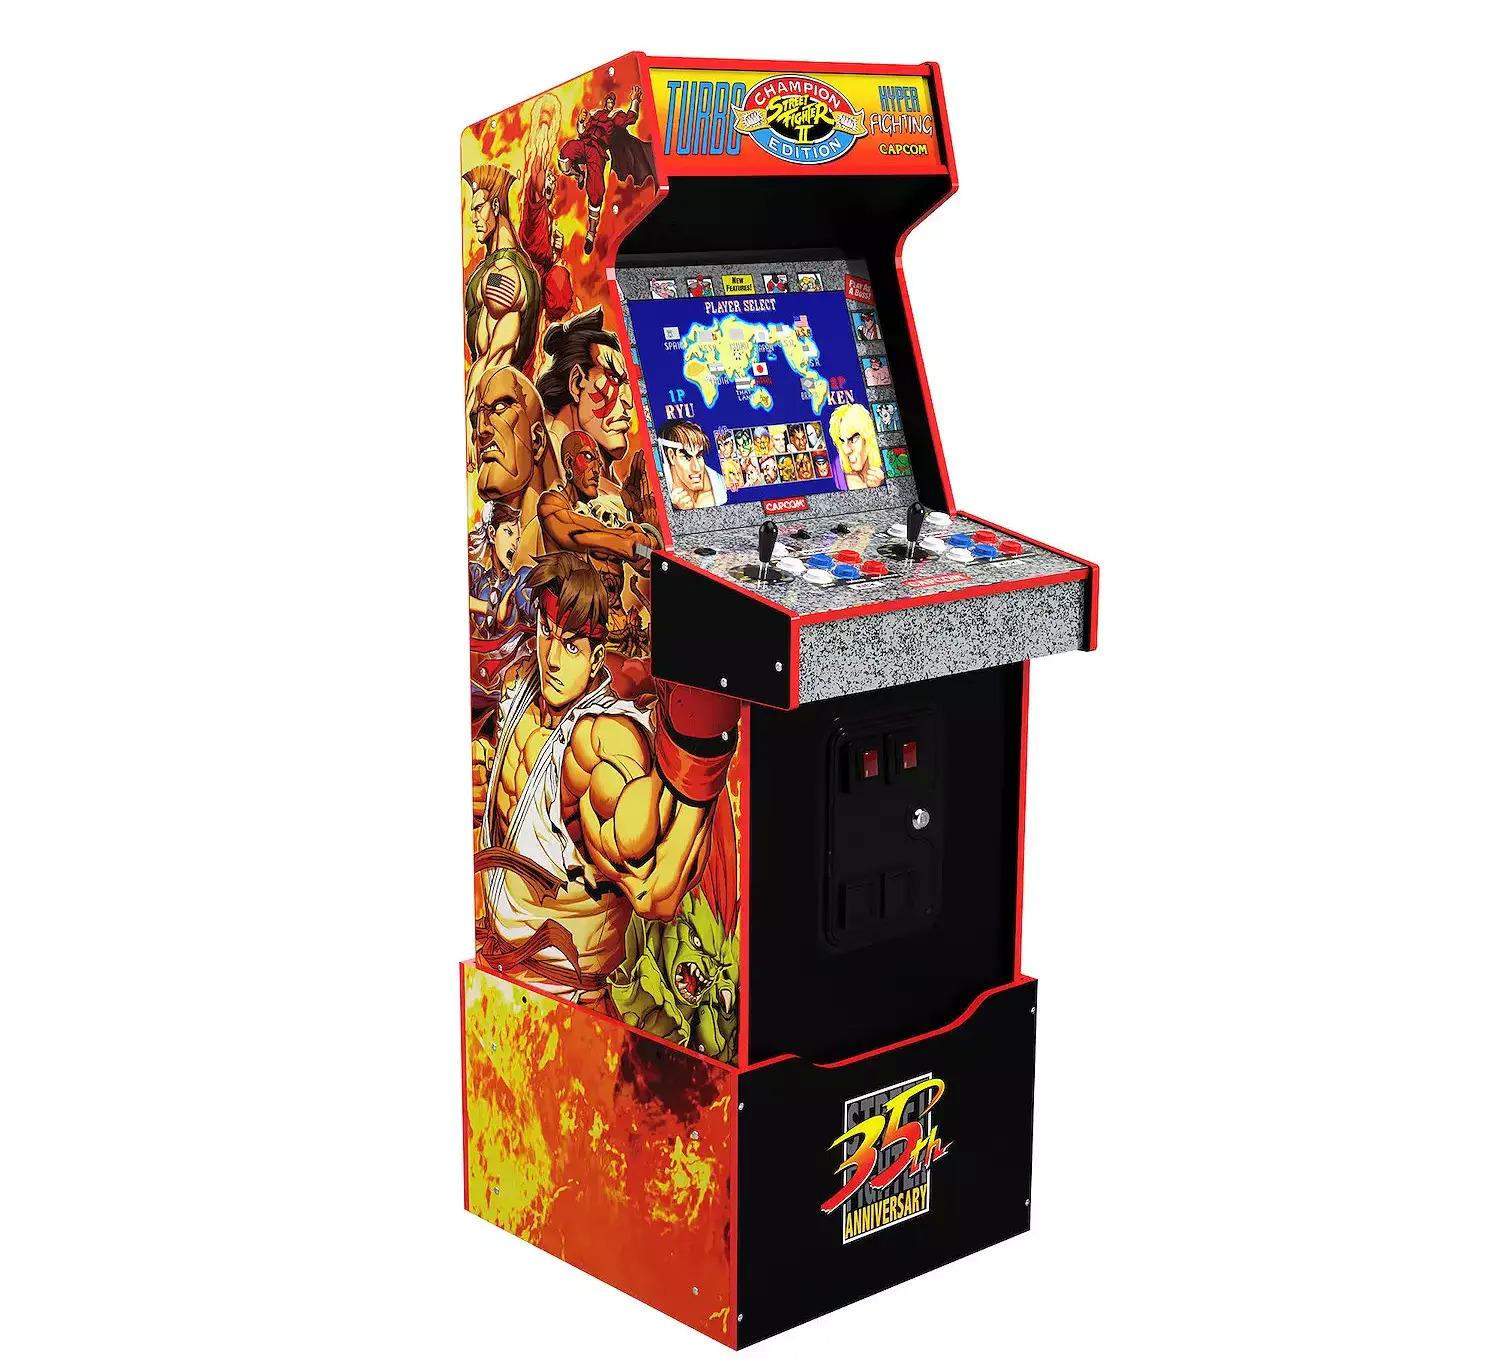 Arcade 1 Up Street Fighter II Champion Turbo Arcade + $60 Kohls for $299.99 Shipped